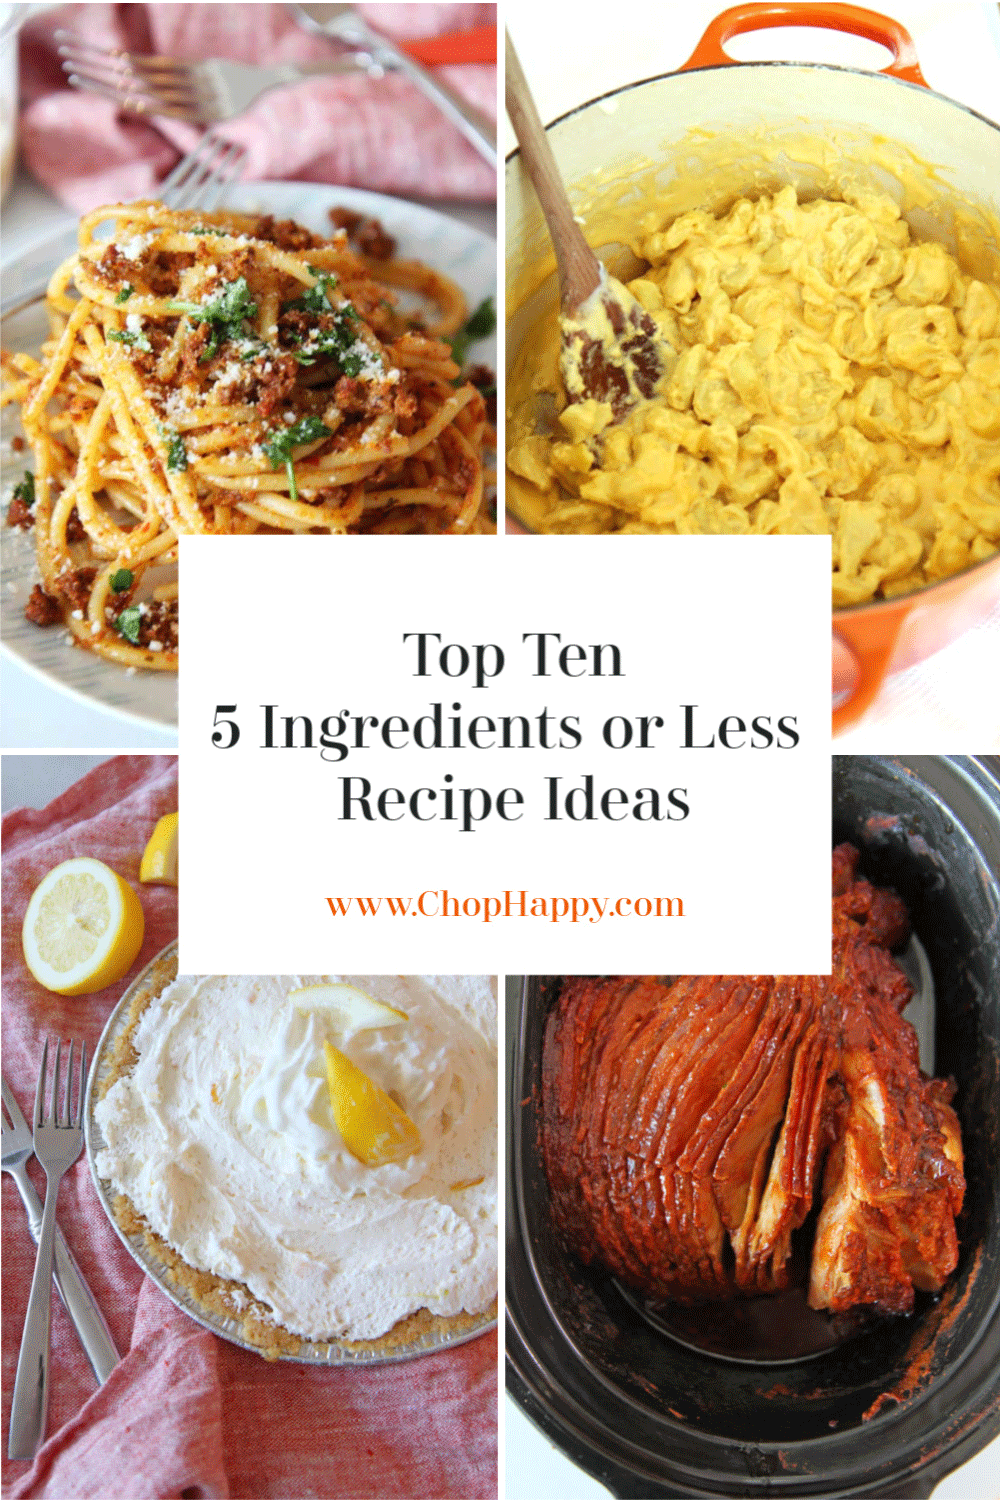 Top Ten 5 Ingredients or Less Recipe Ideas. Grab canned beans, no bake ideas, and jarred sauce to make easy recipes and save money. Happy Cooking! www.ChopHappy.com #savemoney #5IngredientRecipes